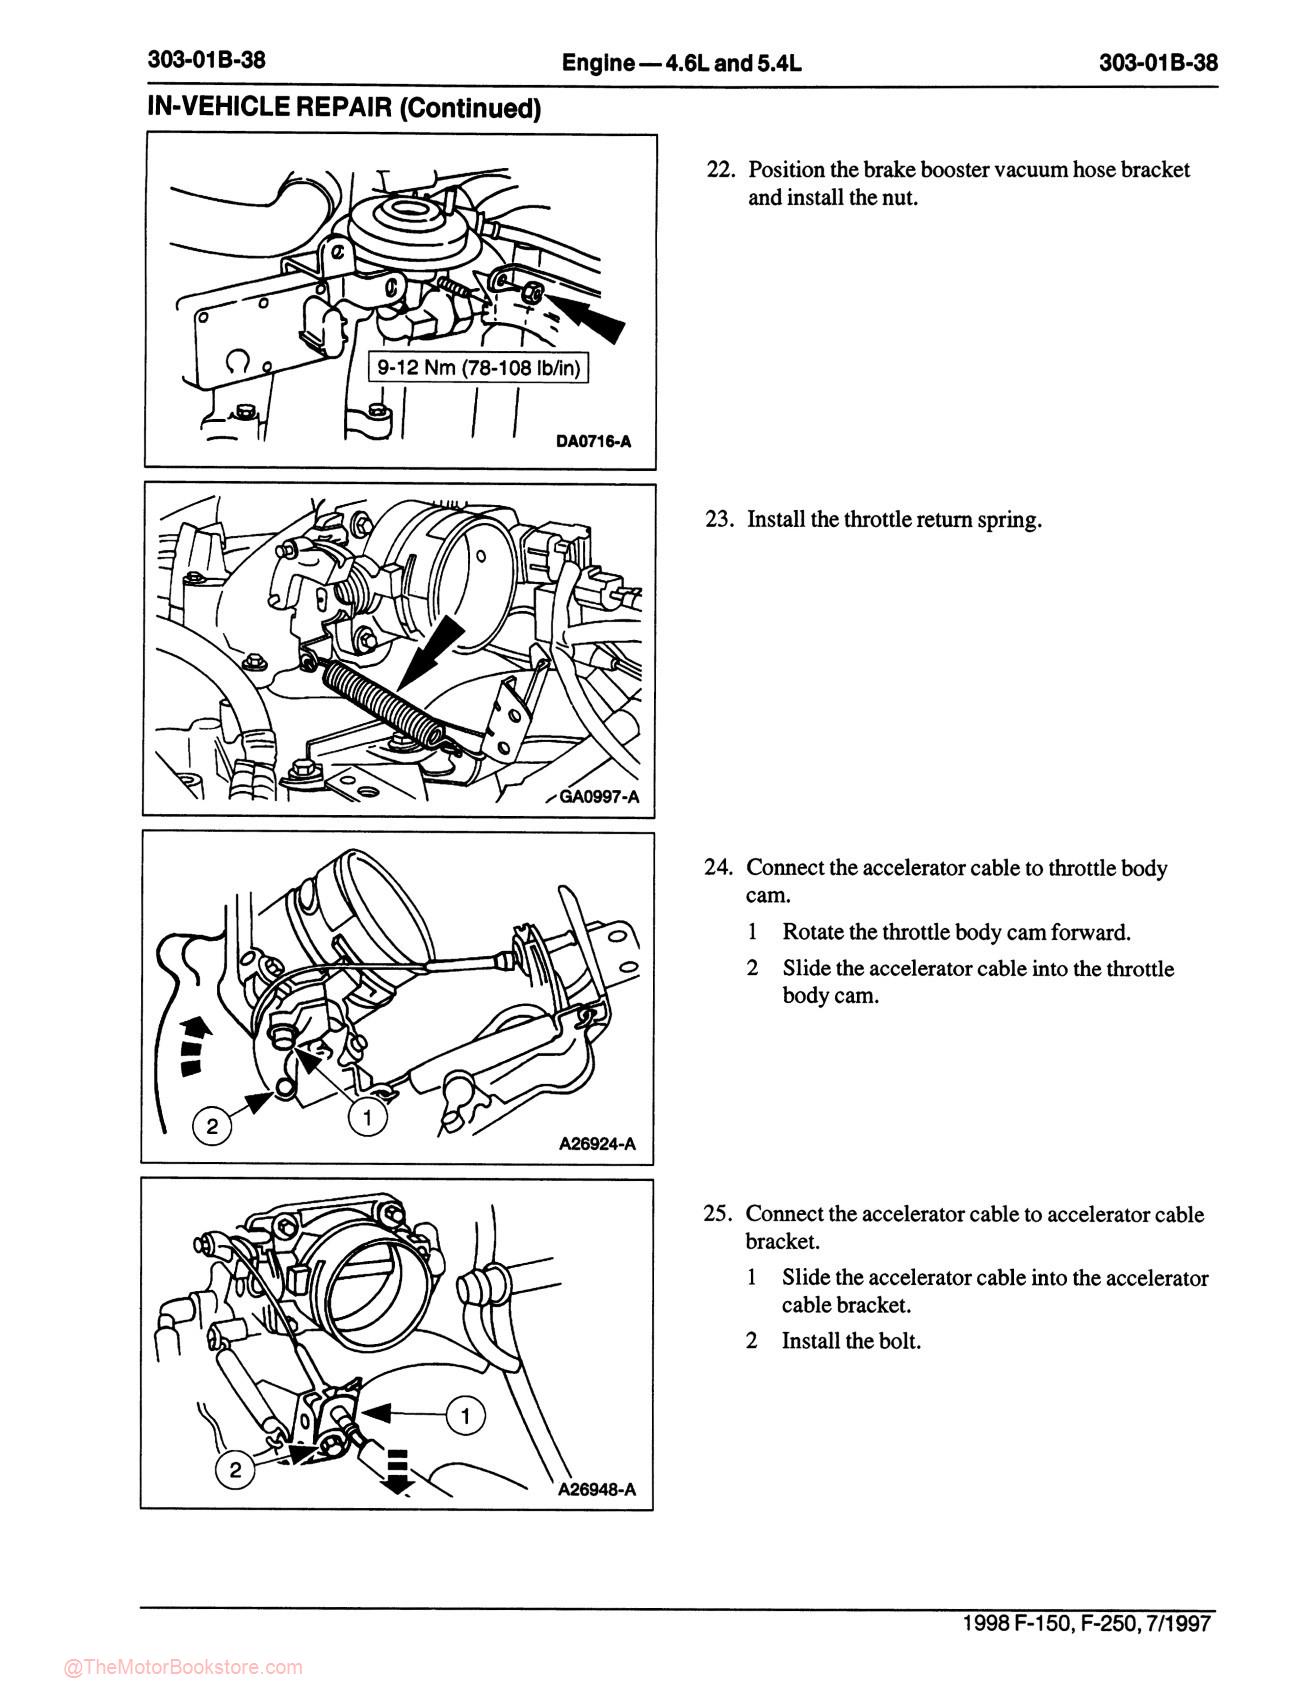 1998 Ford F-150, F-250 Truck Workshop Manual - Sample Page 4